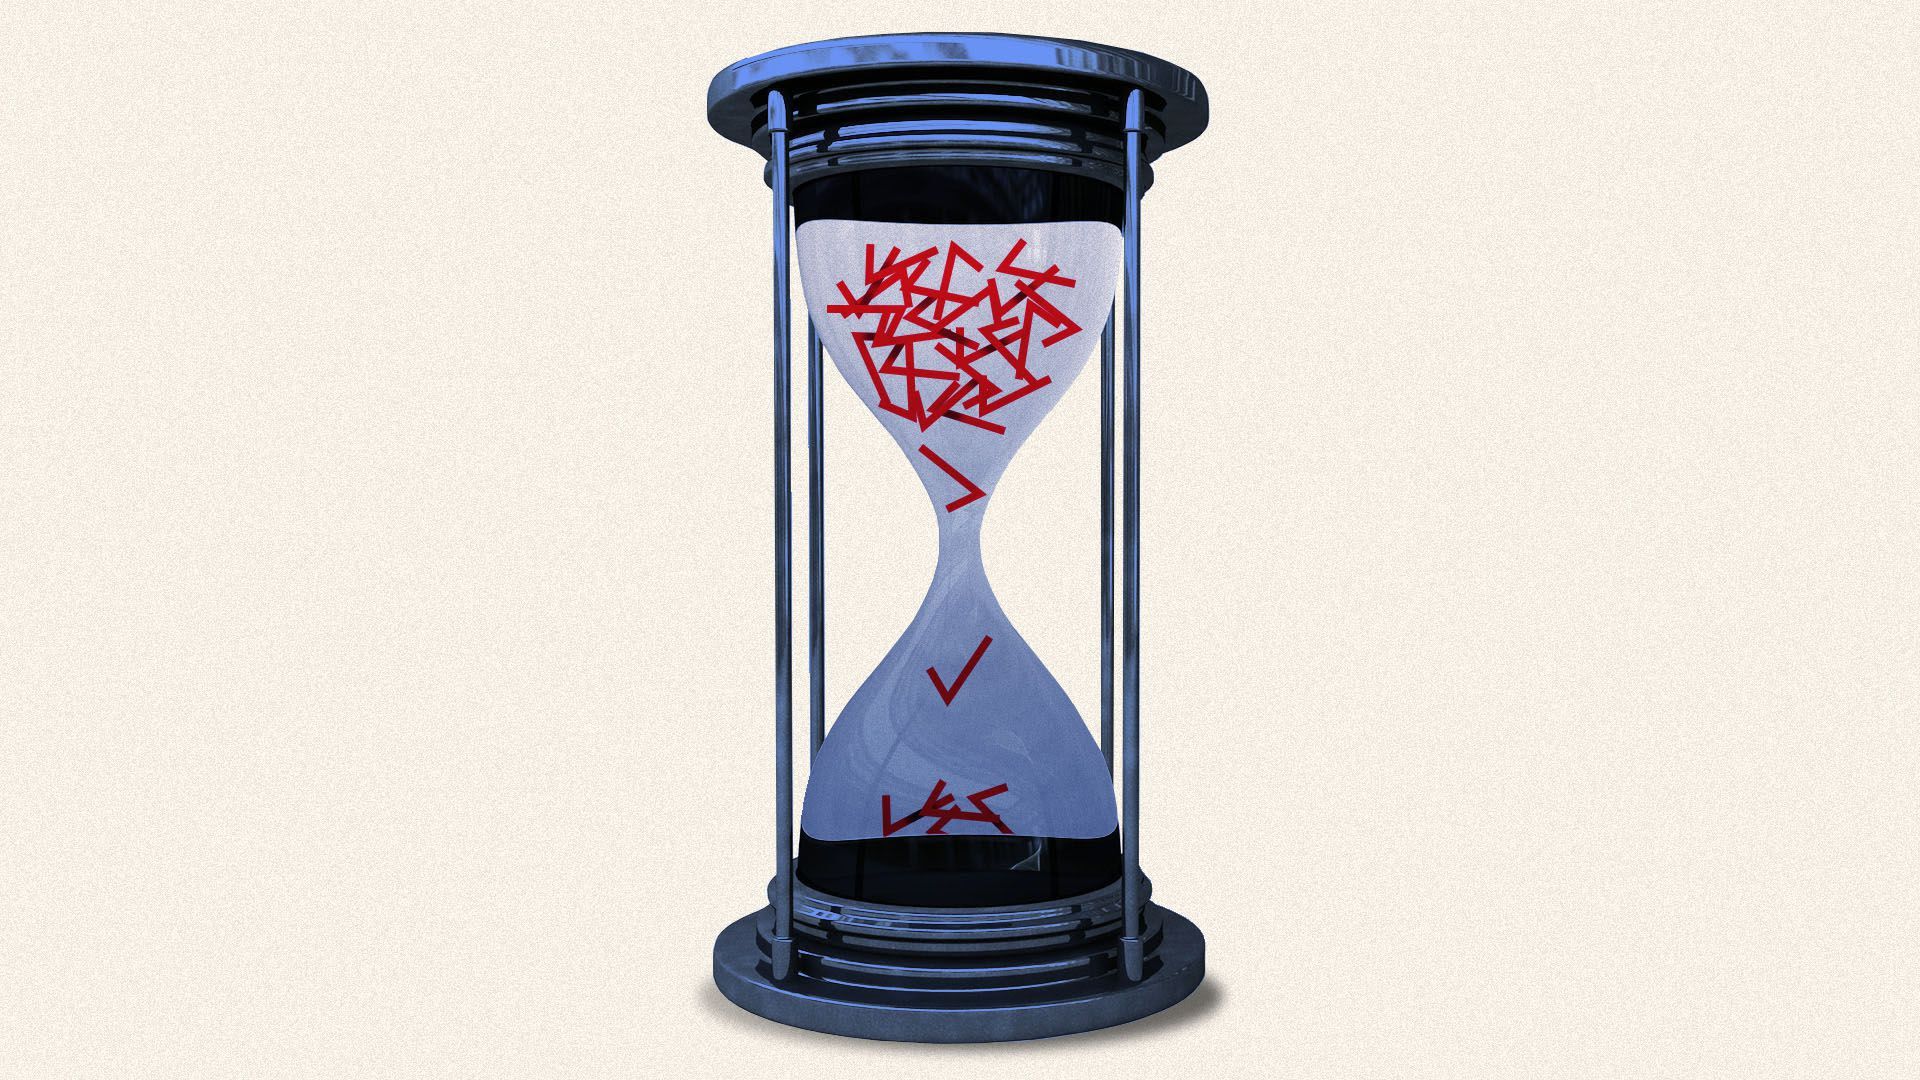 An illustration of an hourglass with marks falling through it